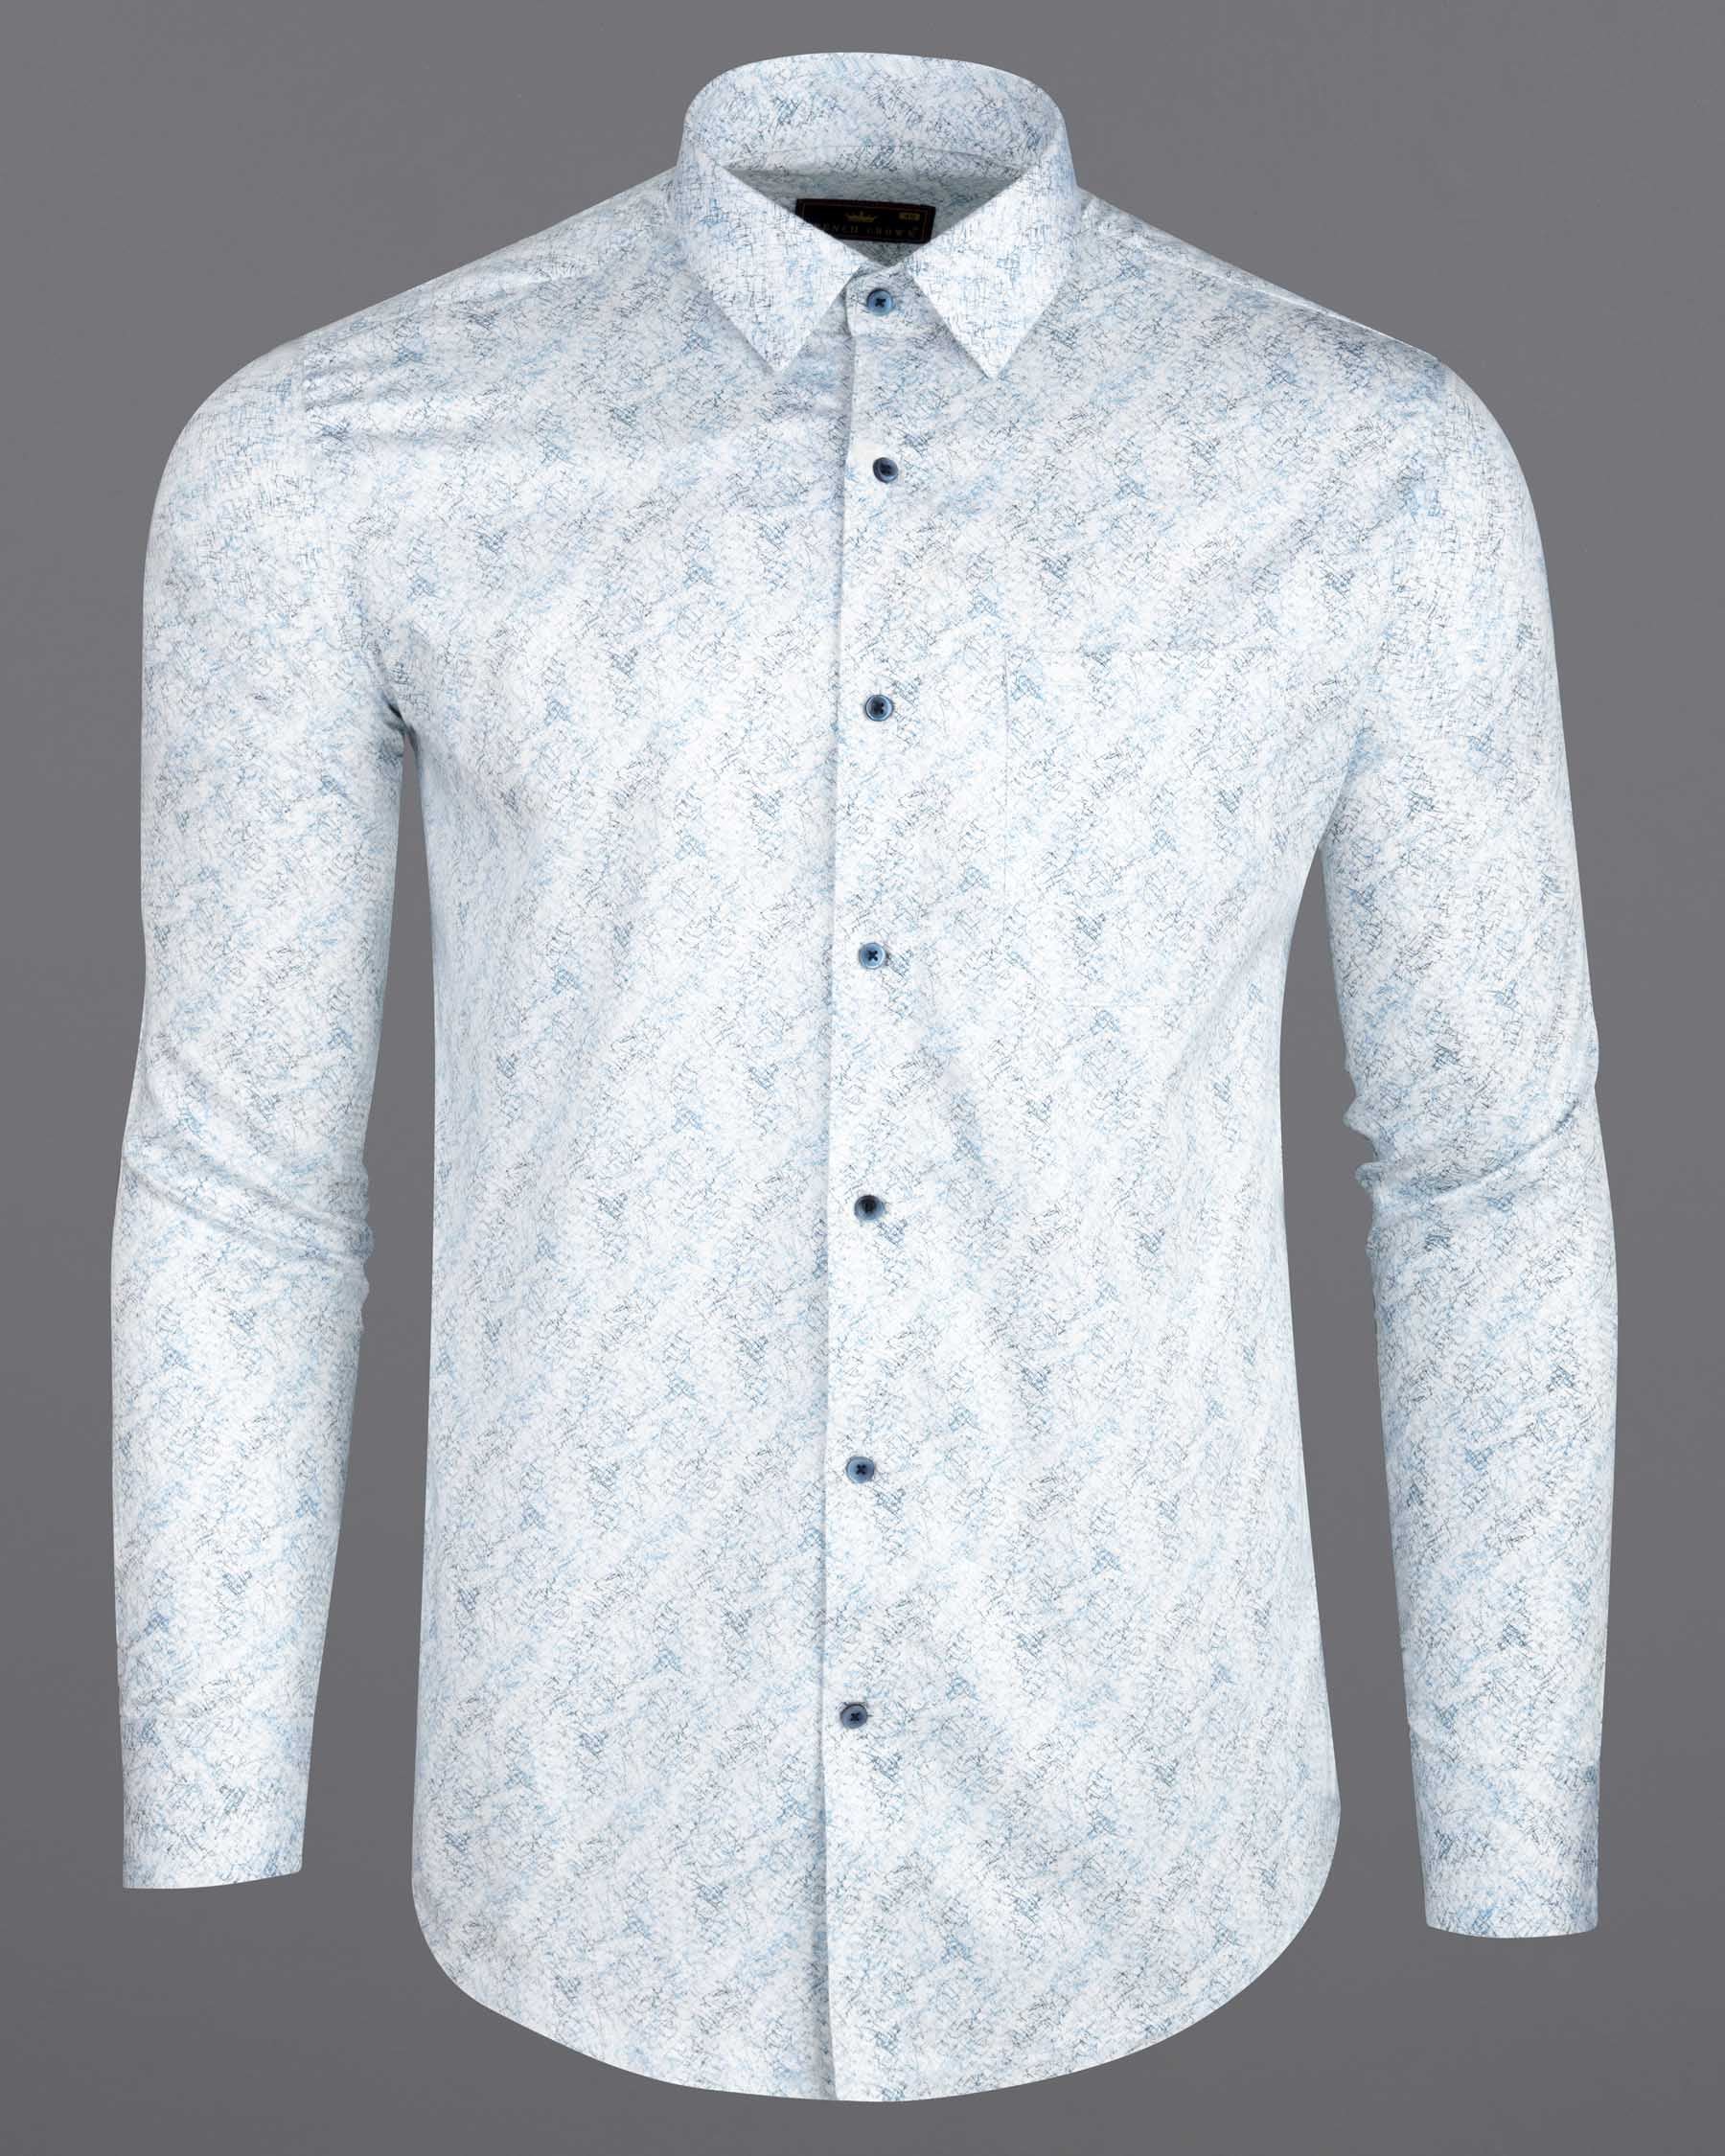 White with Blue abstract print Super Soft Premium Cotton Shirt 6250-BLE-38, 6250-BLE-H-38, 6250-BLE-39, 6250-BLE-H-39, 6250-BLE-40, 6250-BLE-H-40, 6250-BLE-42, 6250-BLE-H-42, 6250-BLE-44, 6250-BLE-H-44, 6250-BLE-46, 6250-BLE-H-46, 6250-BLE-48, 6250-BLE-H-48, 6250-BLE-50, 6250-BLE-H-50, 6250-BLE-52, 6250-BLE-H-52